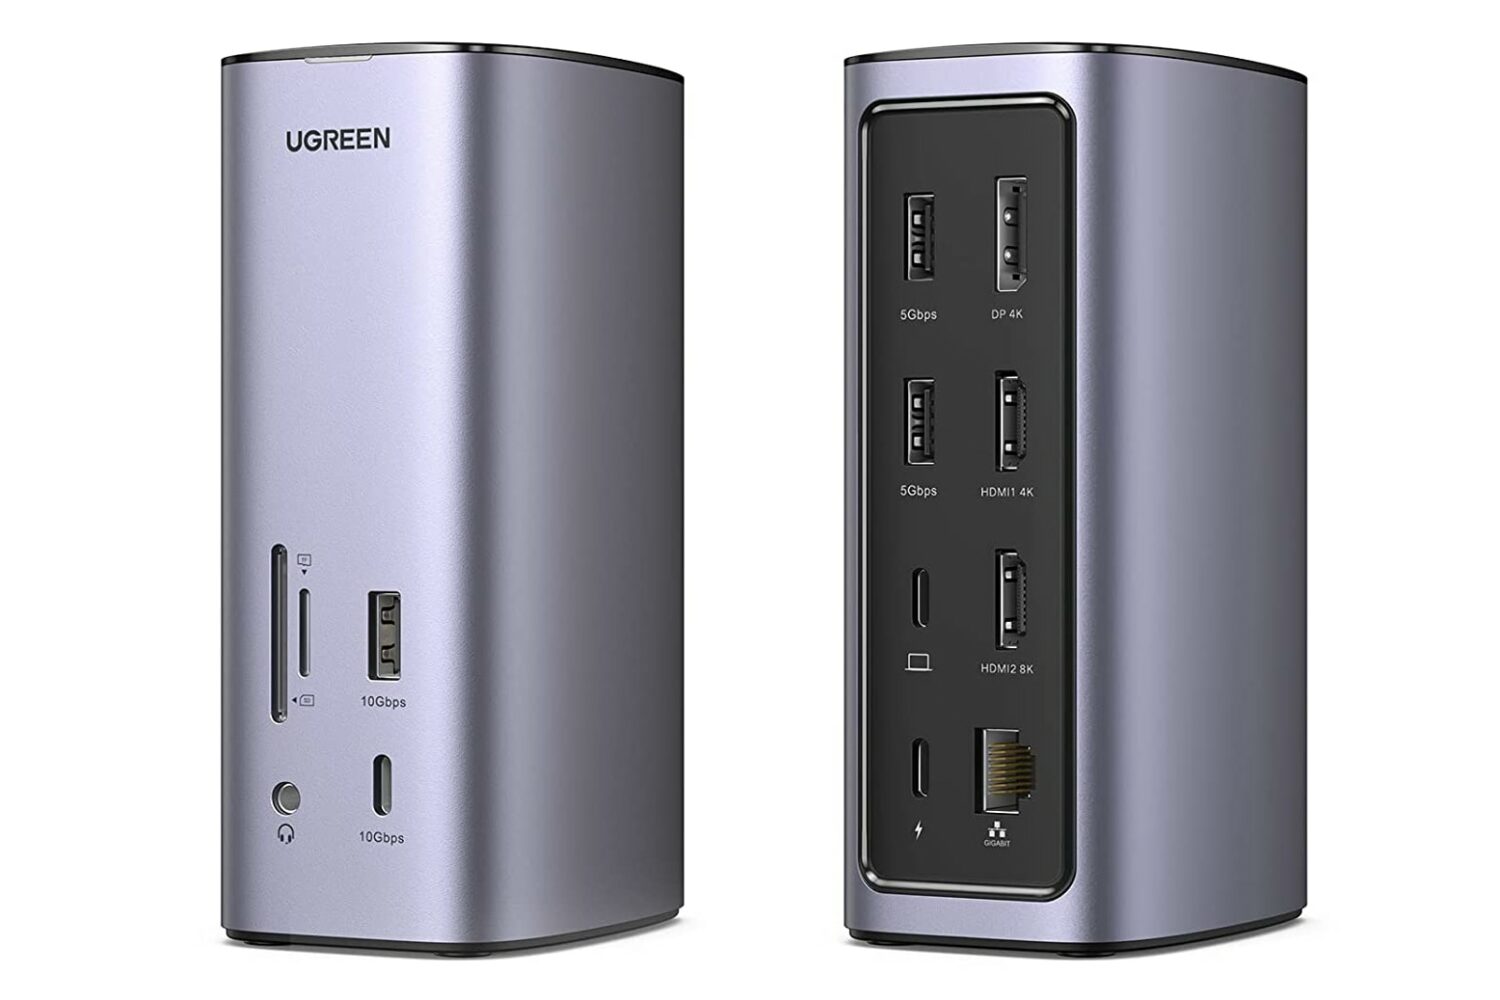 Two Ugreen Nexode docking stations, one showcasing the front ports and the other ones on the back